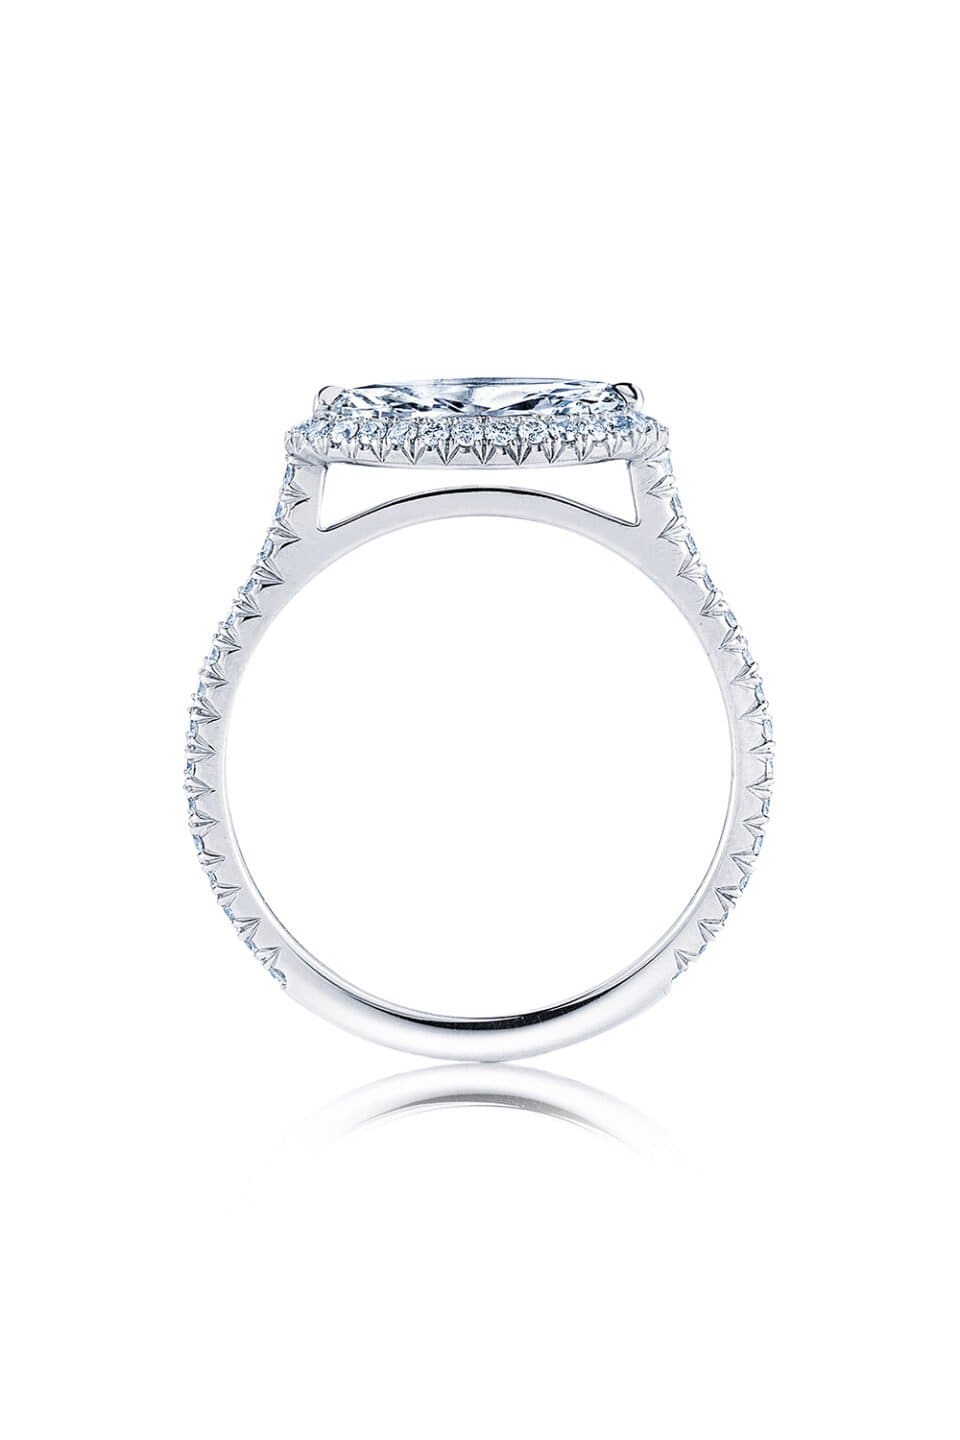 KWIAT-Marquise Diamond with Pave Engagement Ring-PLAT